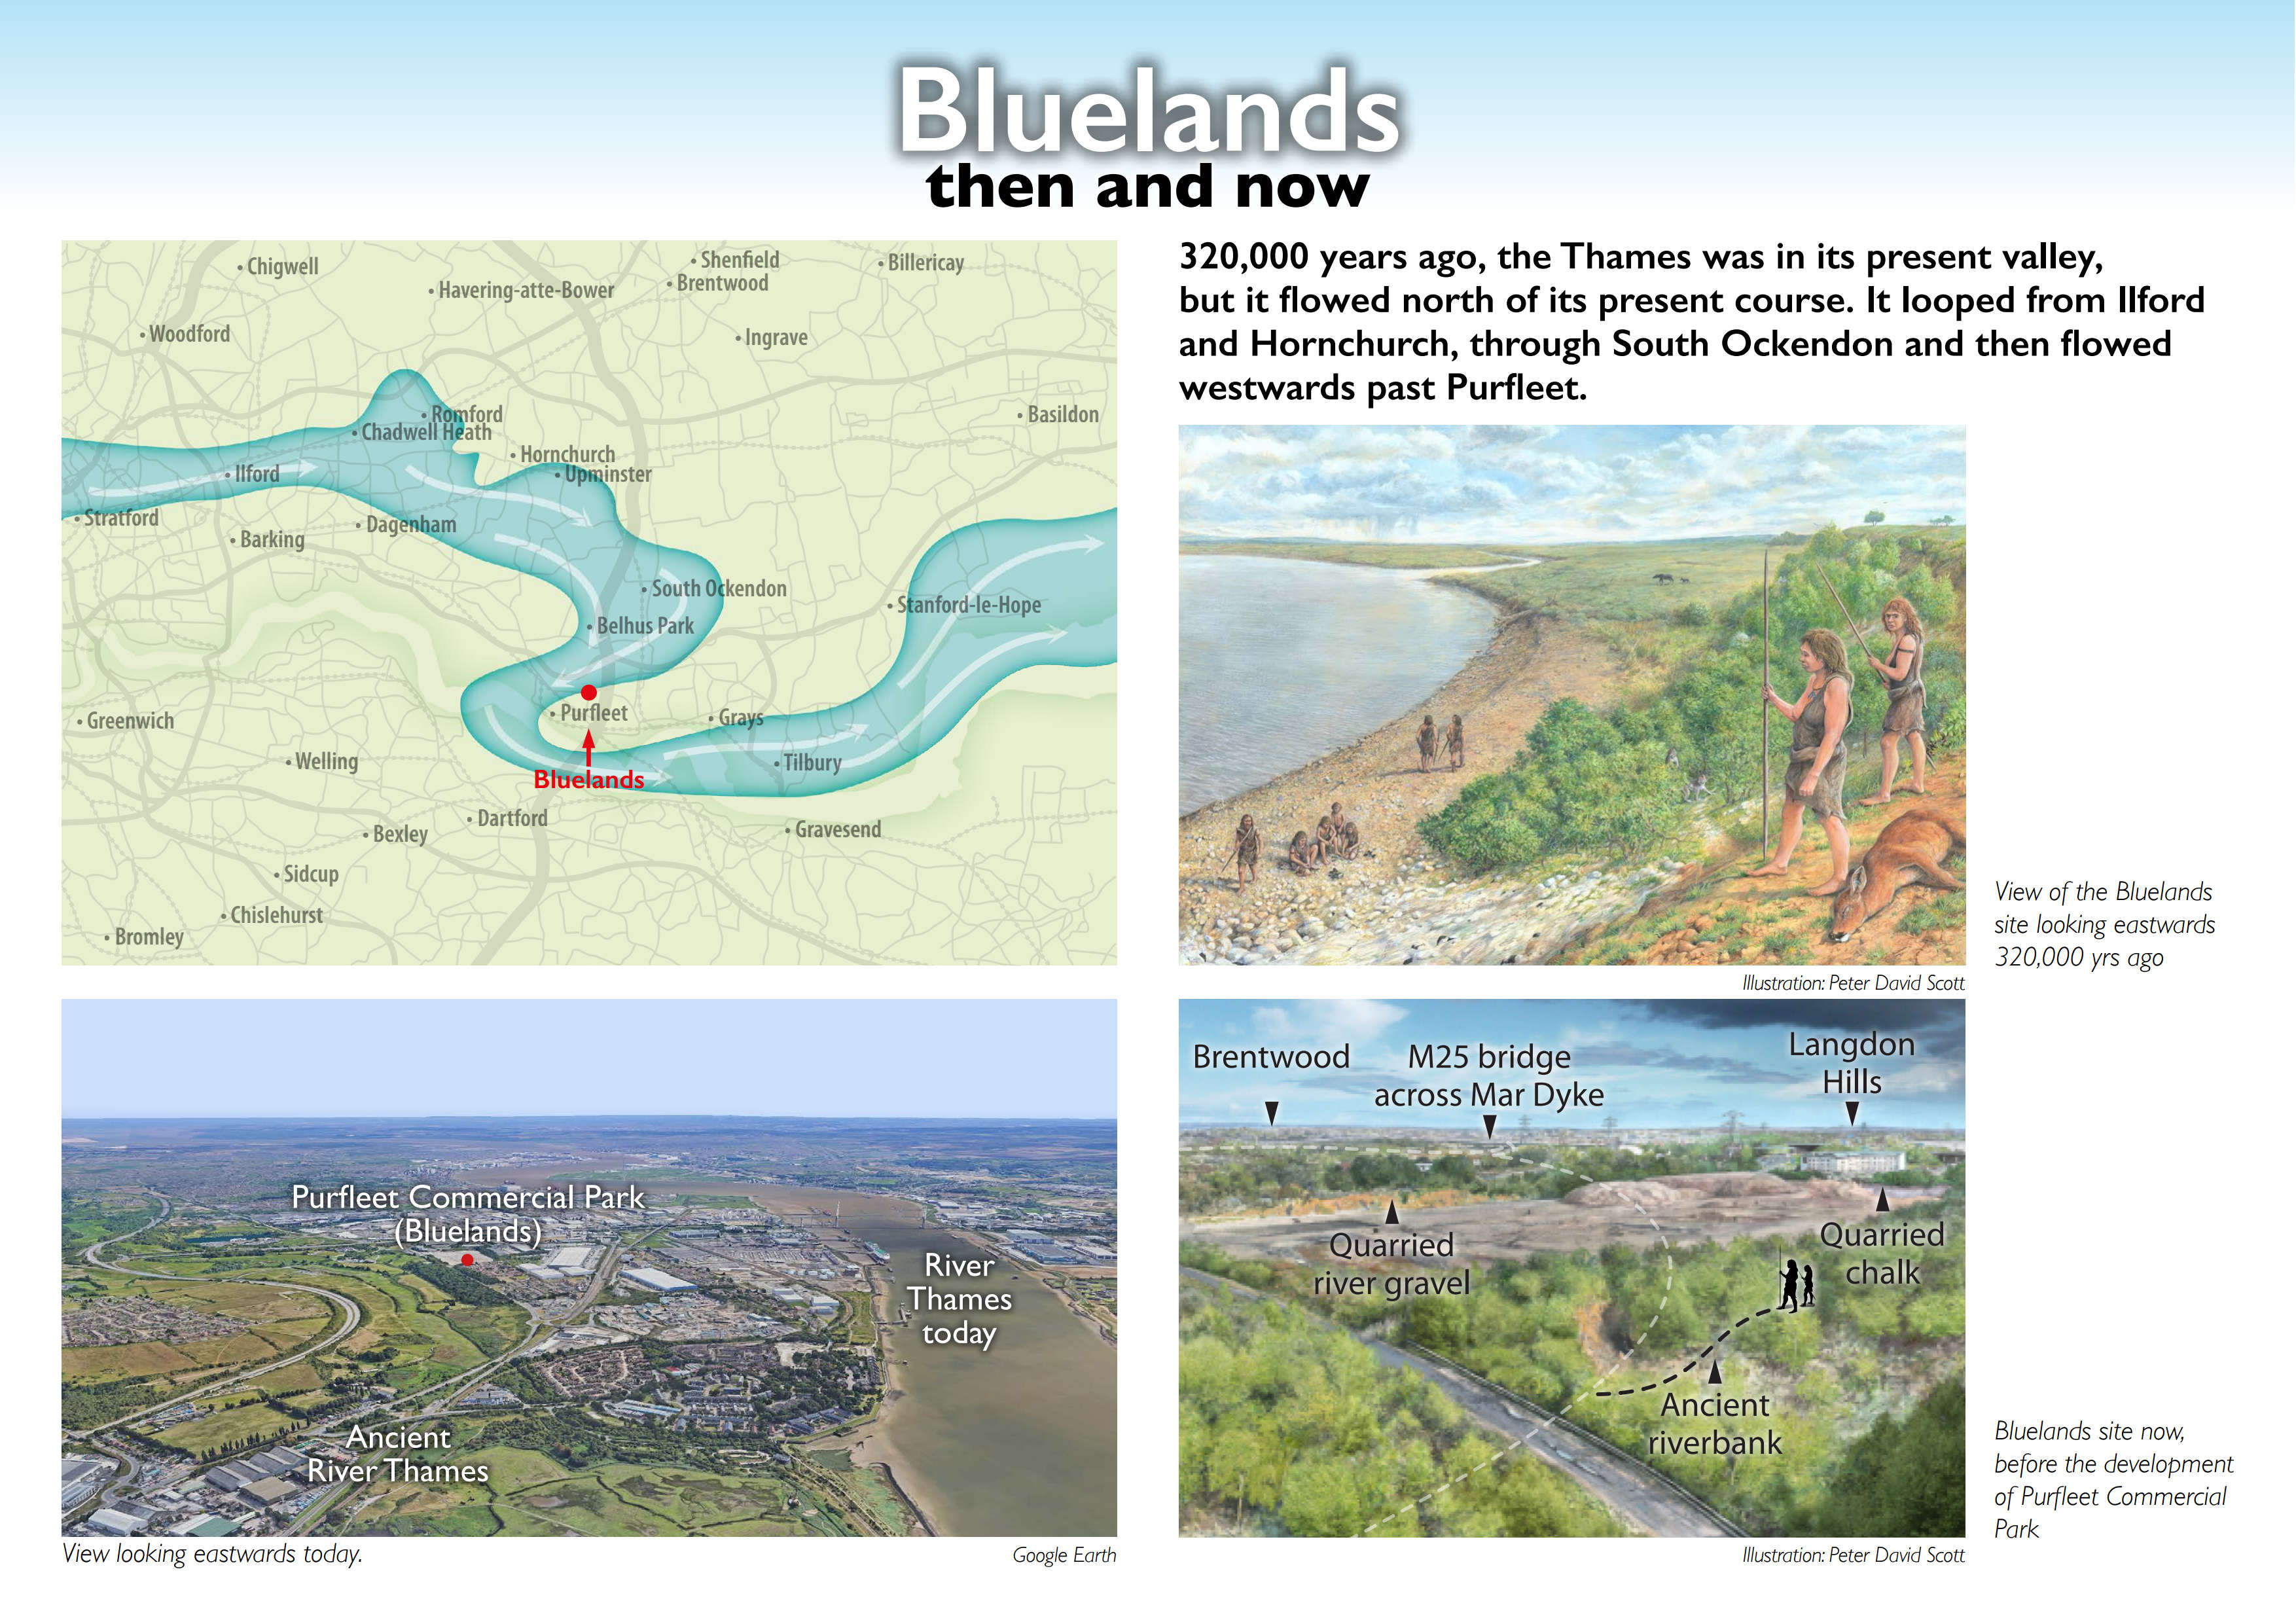 Bluelands Purfleet Grays Hornchurch Tilbury South Ockendon Belhus Park Gravesend Basildon Barking Ilford Stratford Dagenham Stanford-le-Hope Upminster Bexley Bromley Chislehurst Sidcup Welling Greenwich Woodford Chigwell Ingrave Billericay Romford Chadwell Heath Havering-atte-Bower Dartford Brentwood Shenfield Bluelands. Ancient River Thames. Purfleet Commercial Park (Bluelands). River Thames today. Langdon Hills. Brentwood. M25 bridge across Mar Dyke. Quarried river gravel. Ancient riverbank. Quarried chalk. View looking eastwards today. View of the Bluelands site looking eastwards 320,000 yrs ago. Bluelands site now, before the development of Purfleet Commercial Park 320,000 years ago, the Thames was in its present valley, but it flowed north of its present course. It looped from Ilford and Hornchurch, through South Ockendon and then flowed westwards past Purfleet. Illustration: Peter David Scott.